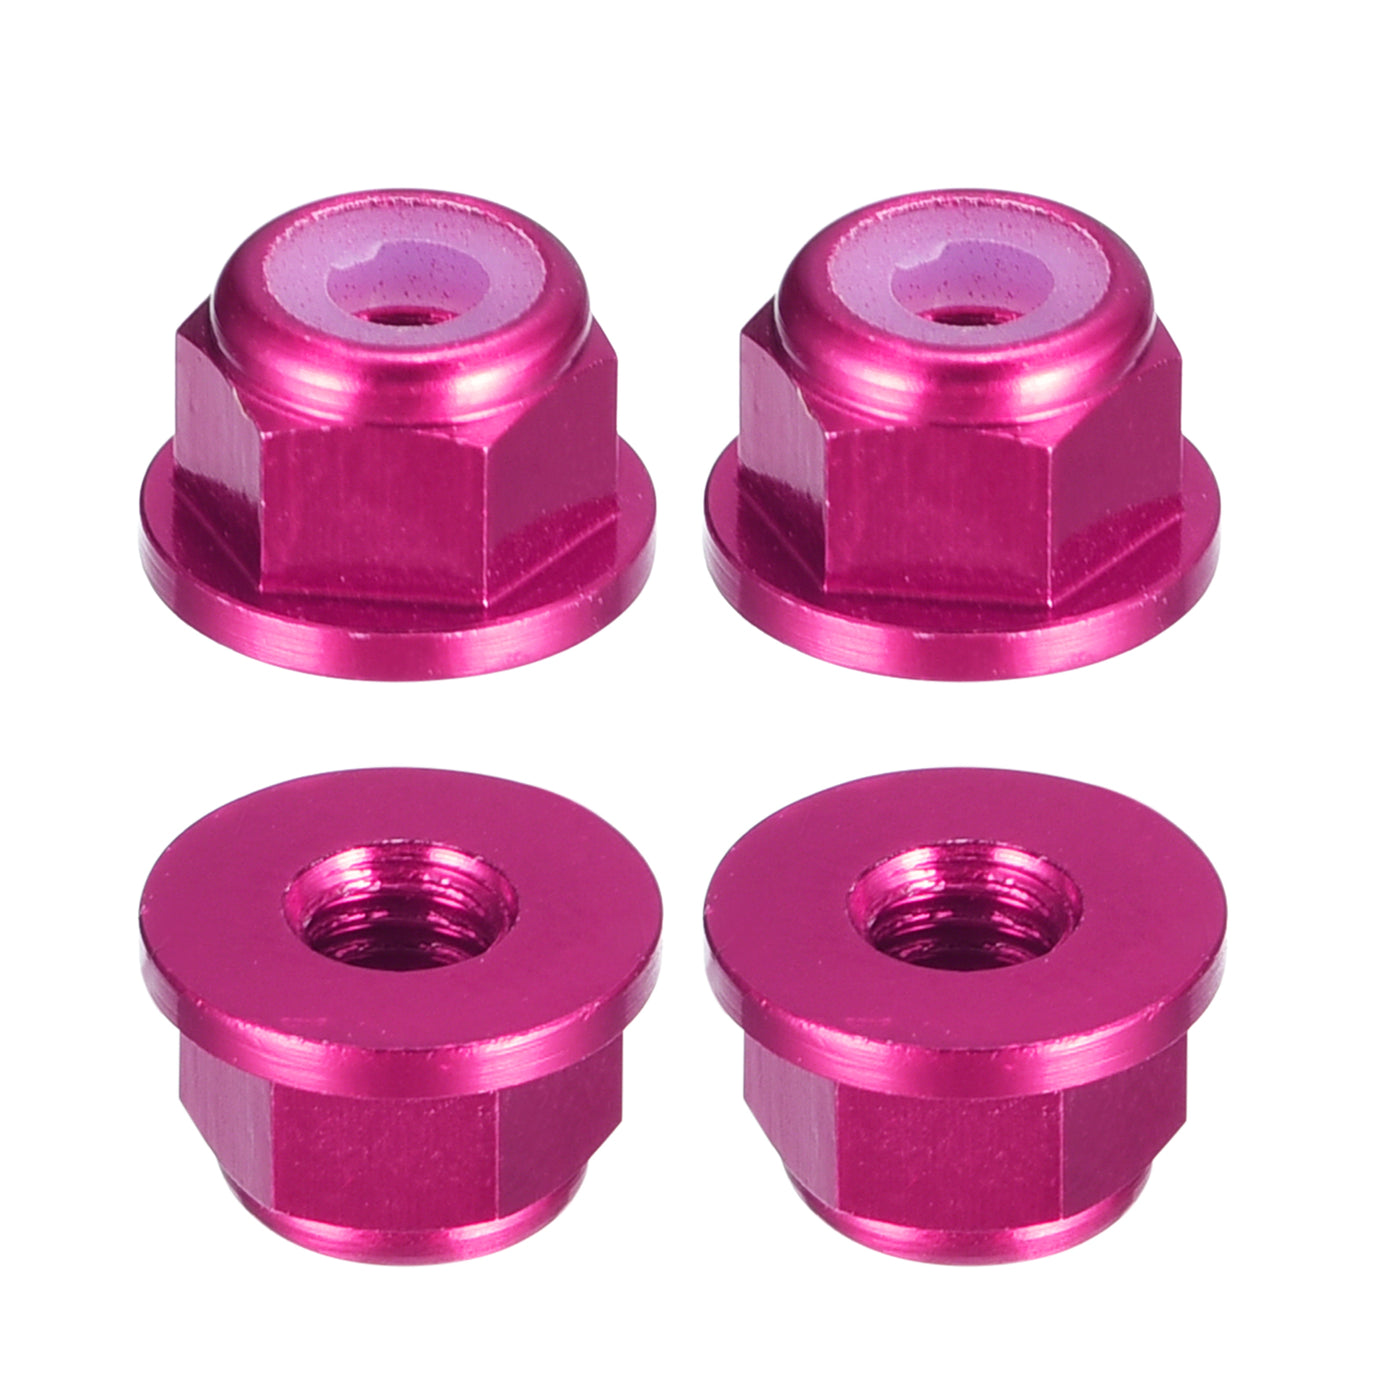 uxcell Uxcell Nylon Insert Hex Lock Nuts, 4pcs - M2 x 0.4mm Aluminum Alloy Self-Locking Nut, Anodizing Flange Lock Nut for Fasteners (Pink)